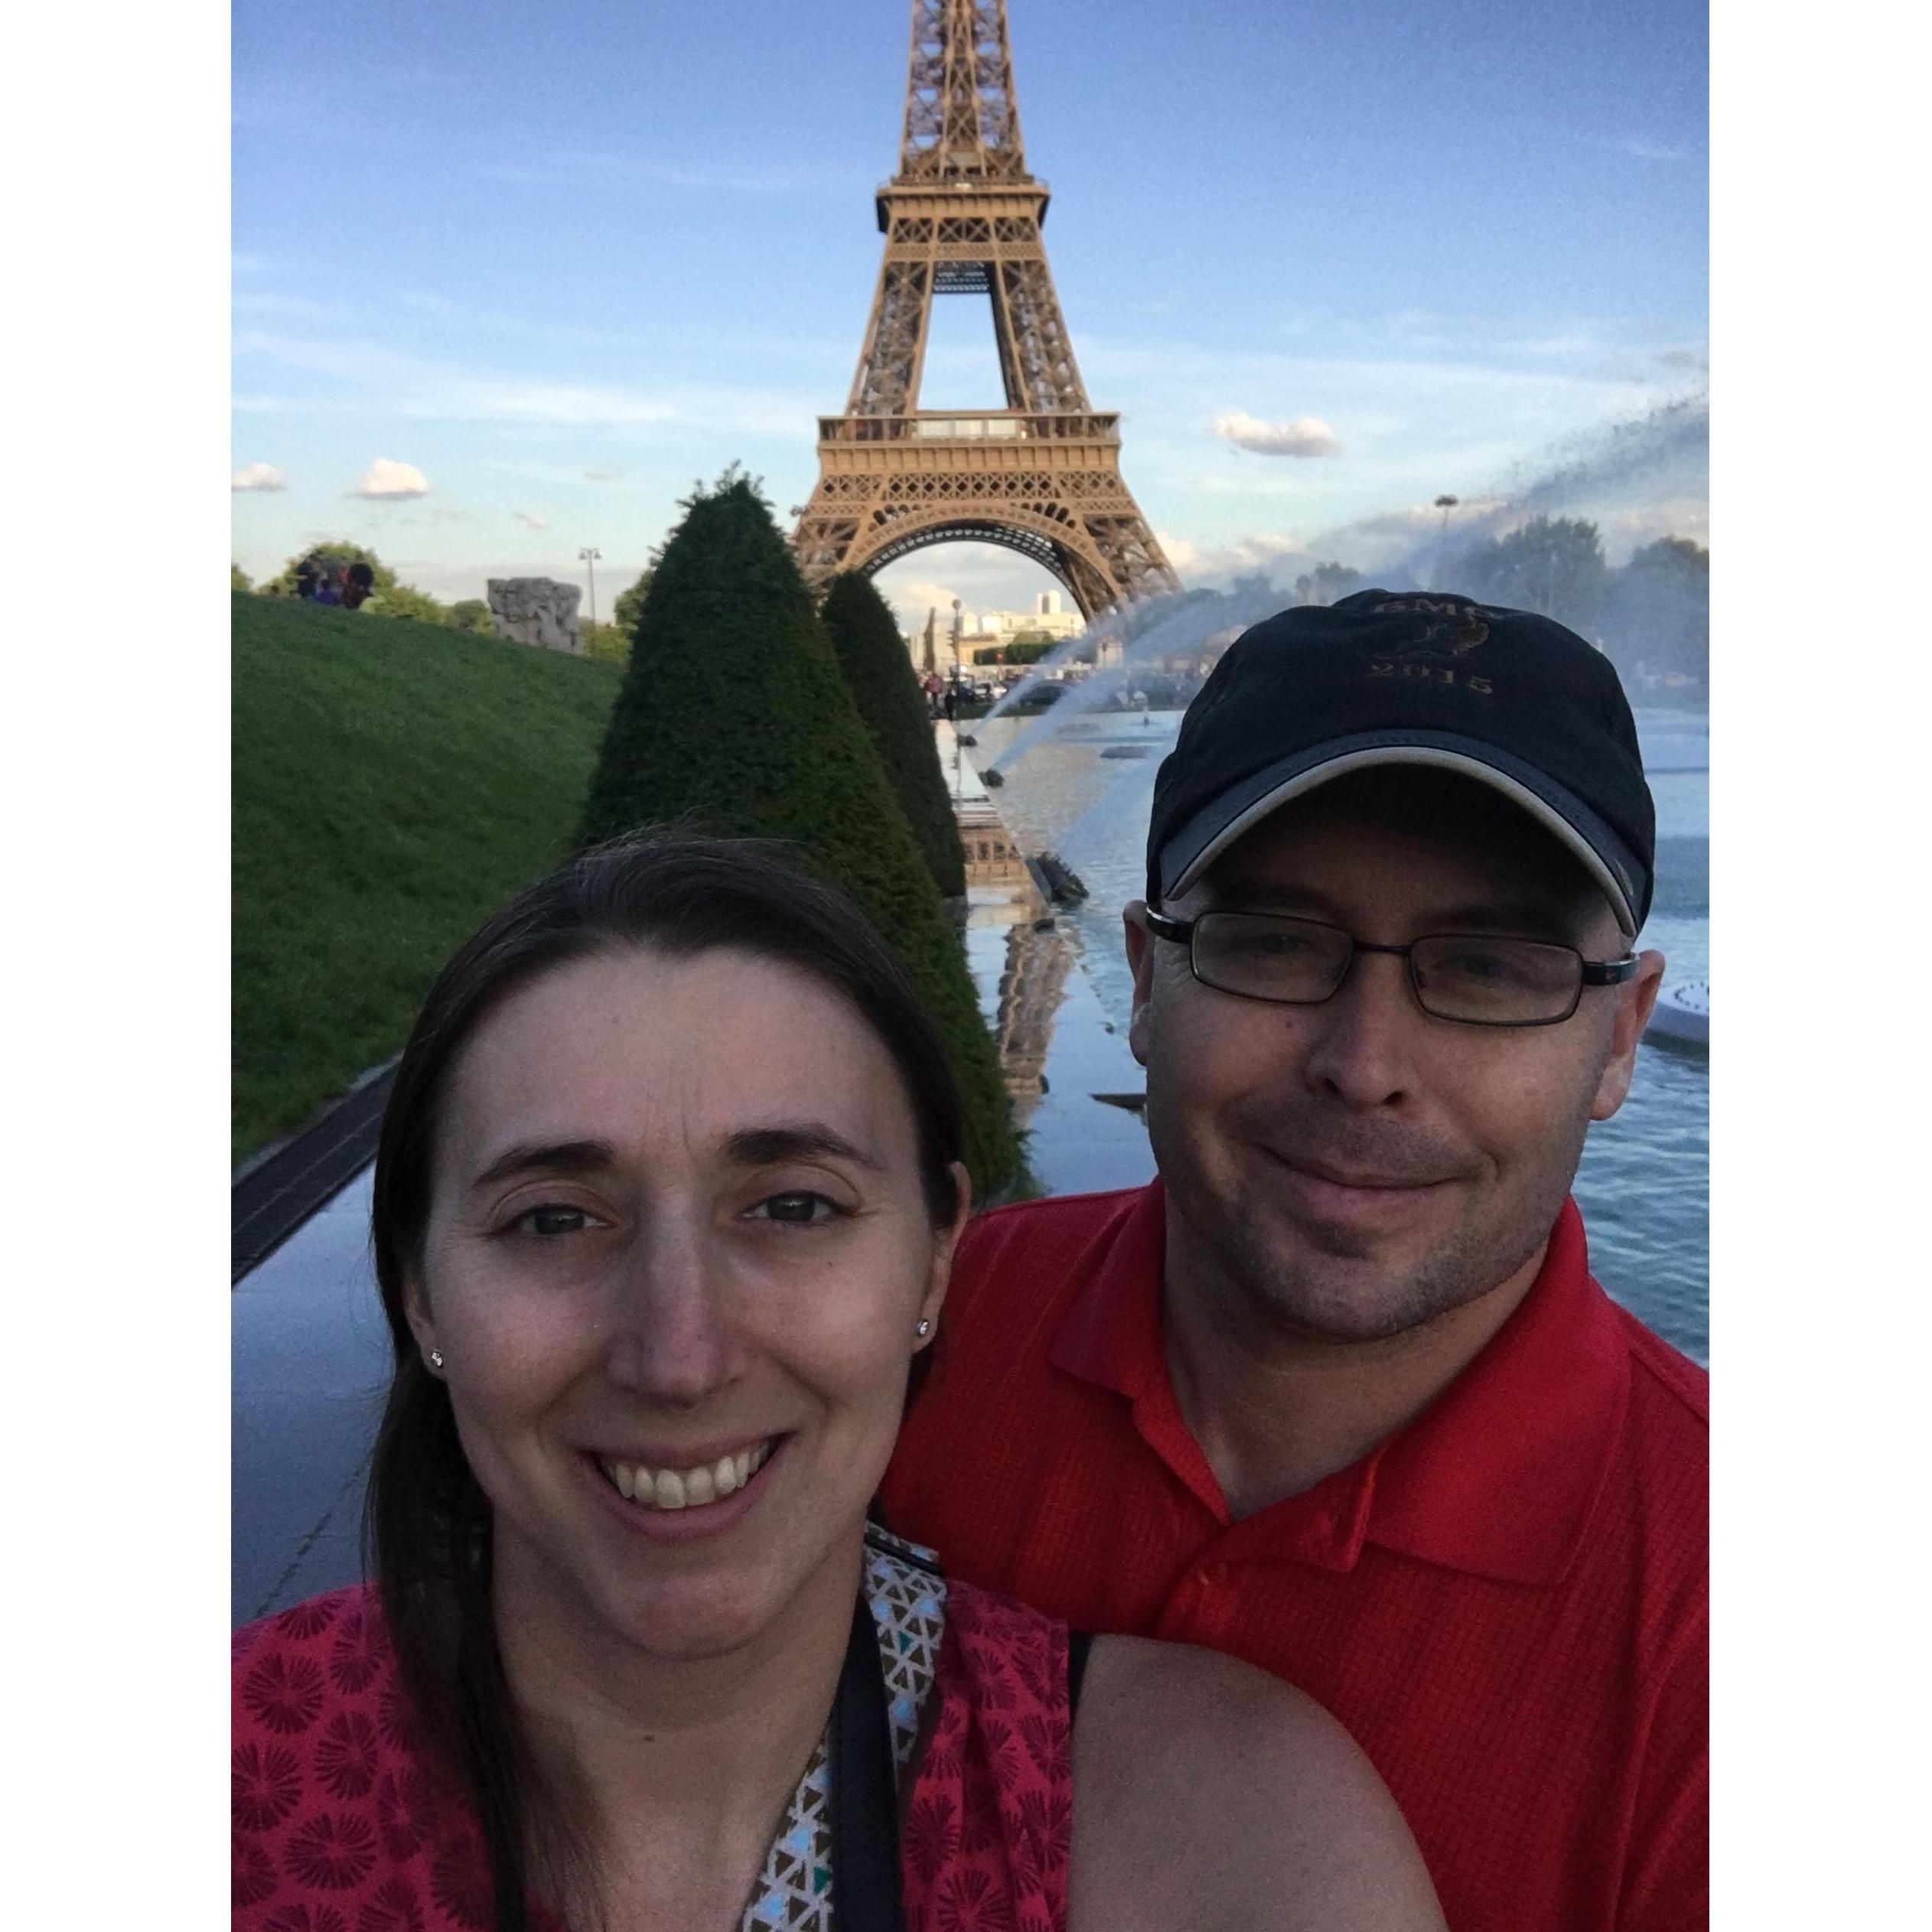 Paris 2018 - The first stop on our Europe vacation which ended in the proposal!